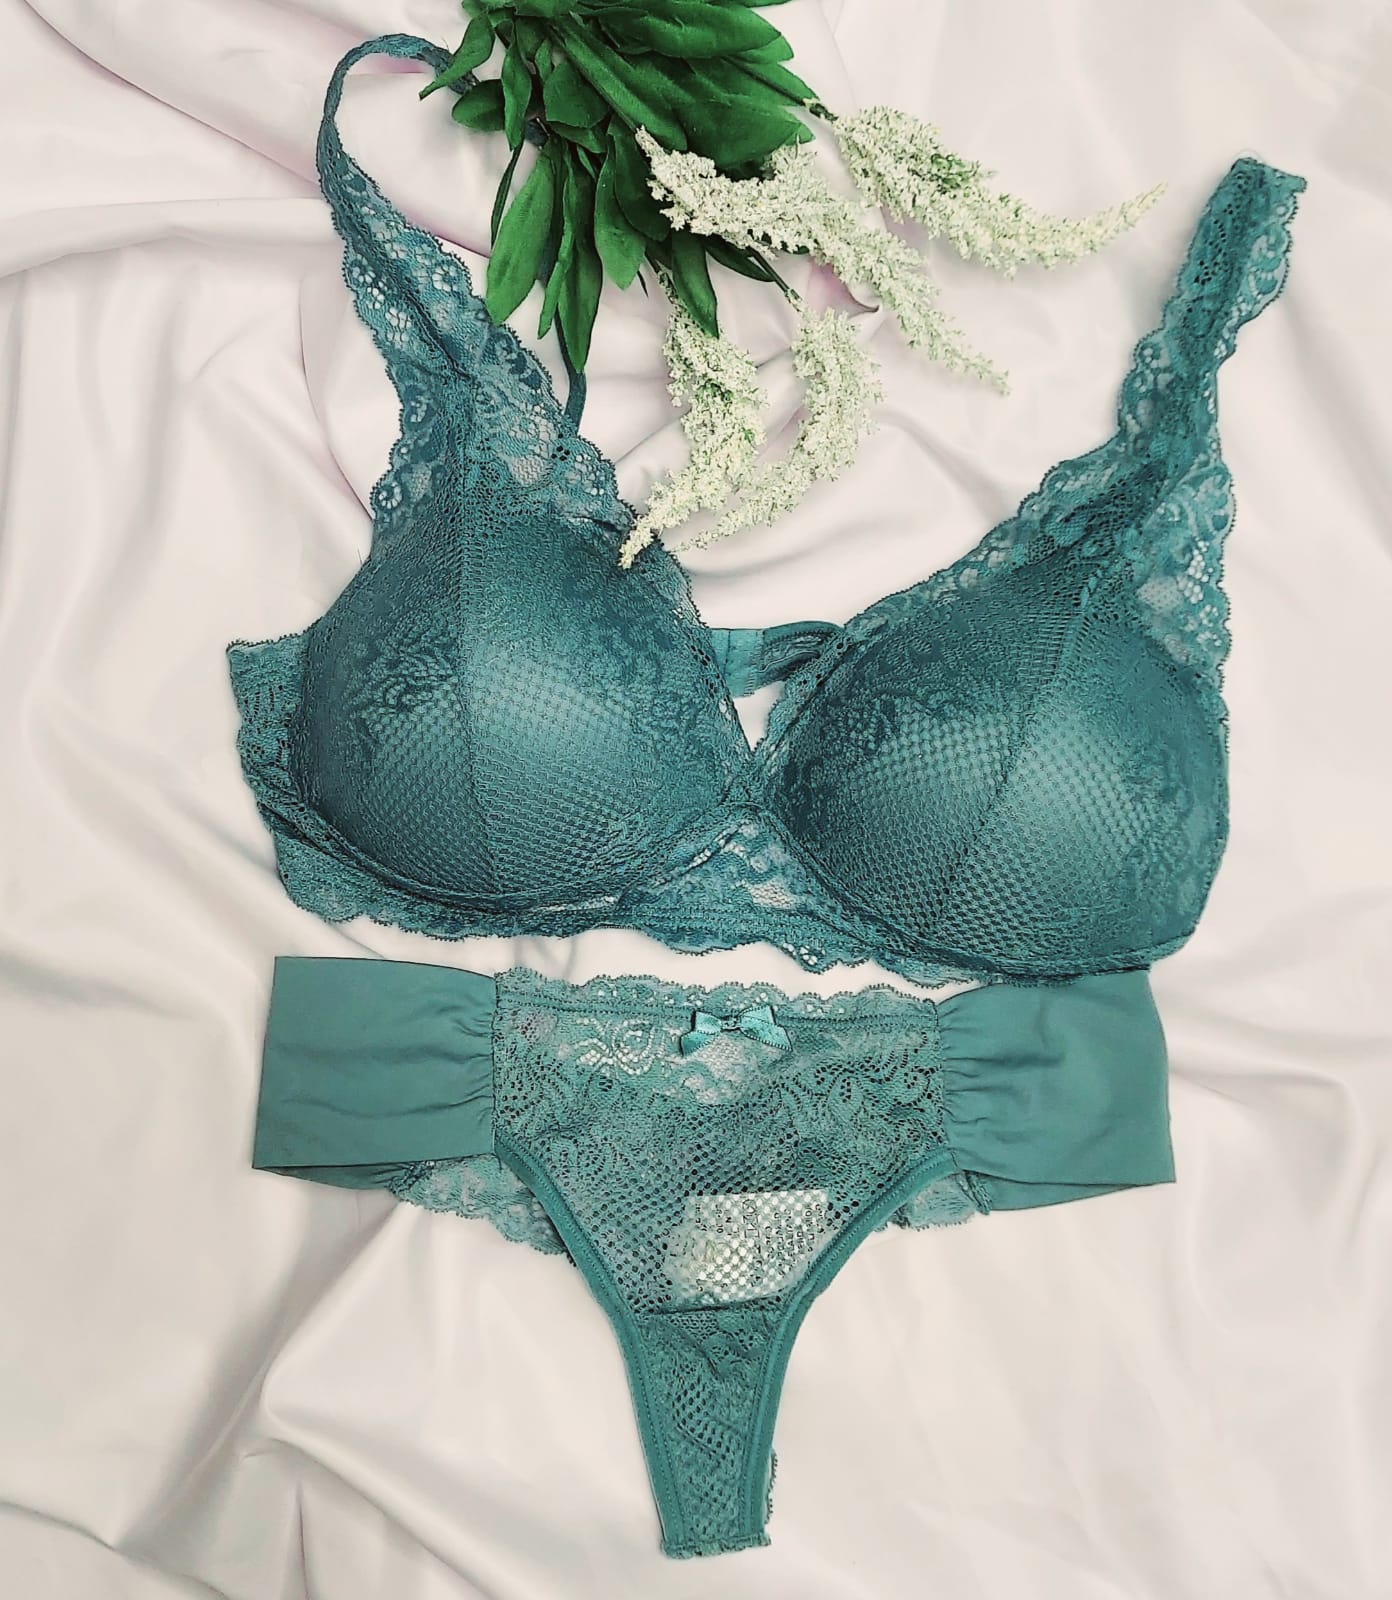 Bra with lace Color teal green - SINSAY - 8188F-67X